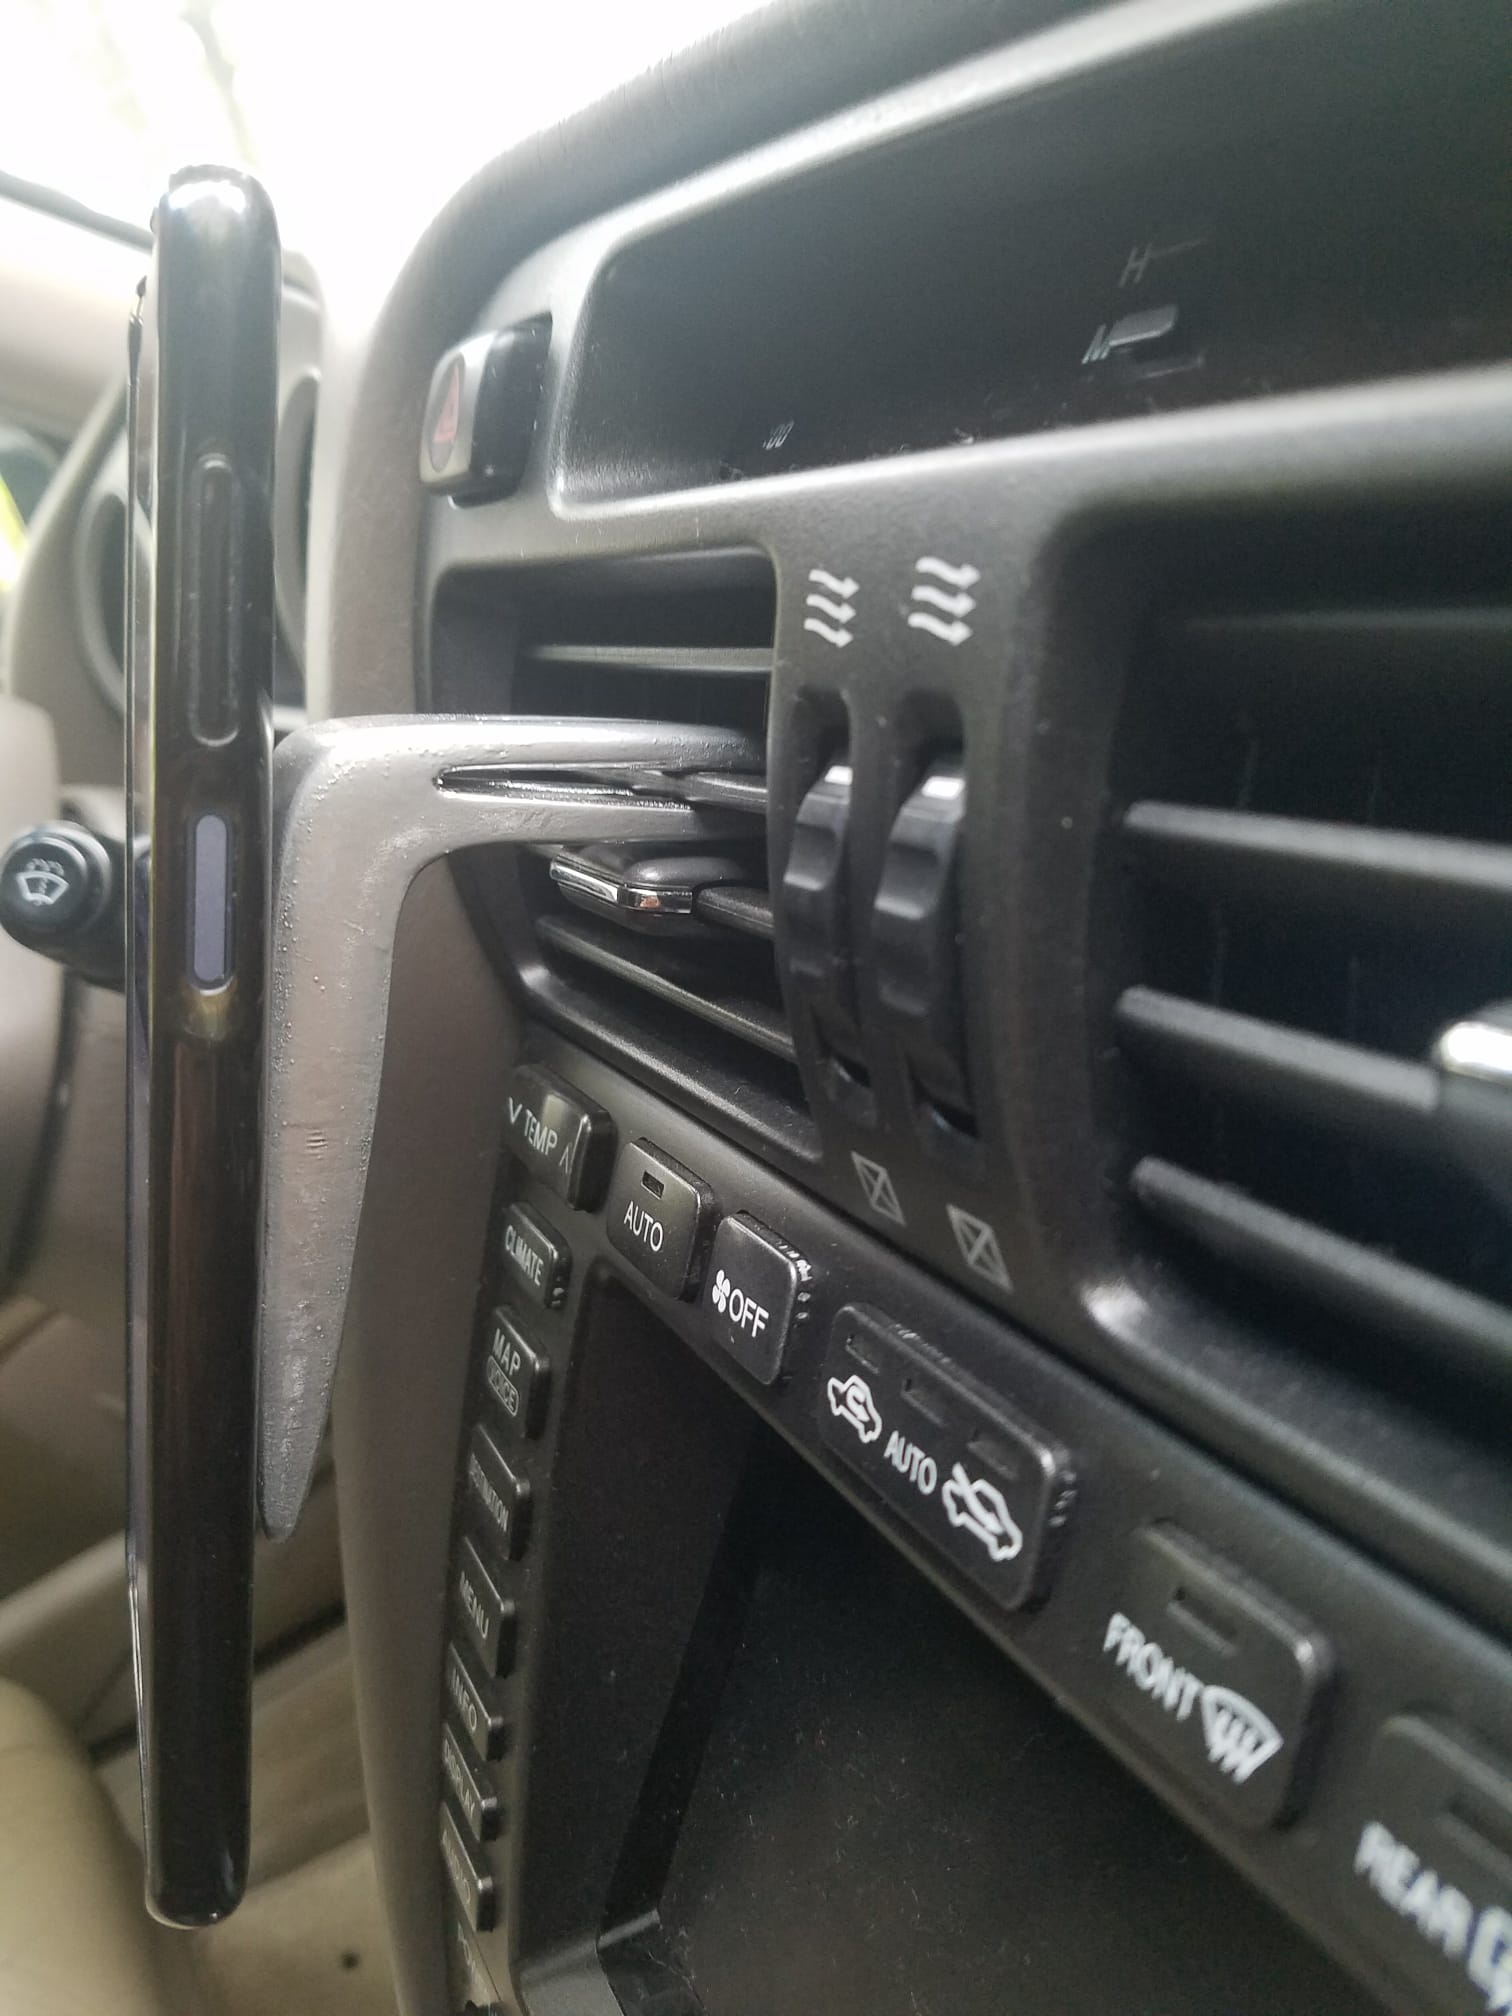 How to make a DIY phone holder for your car